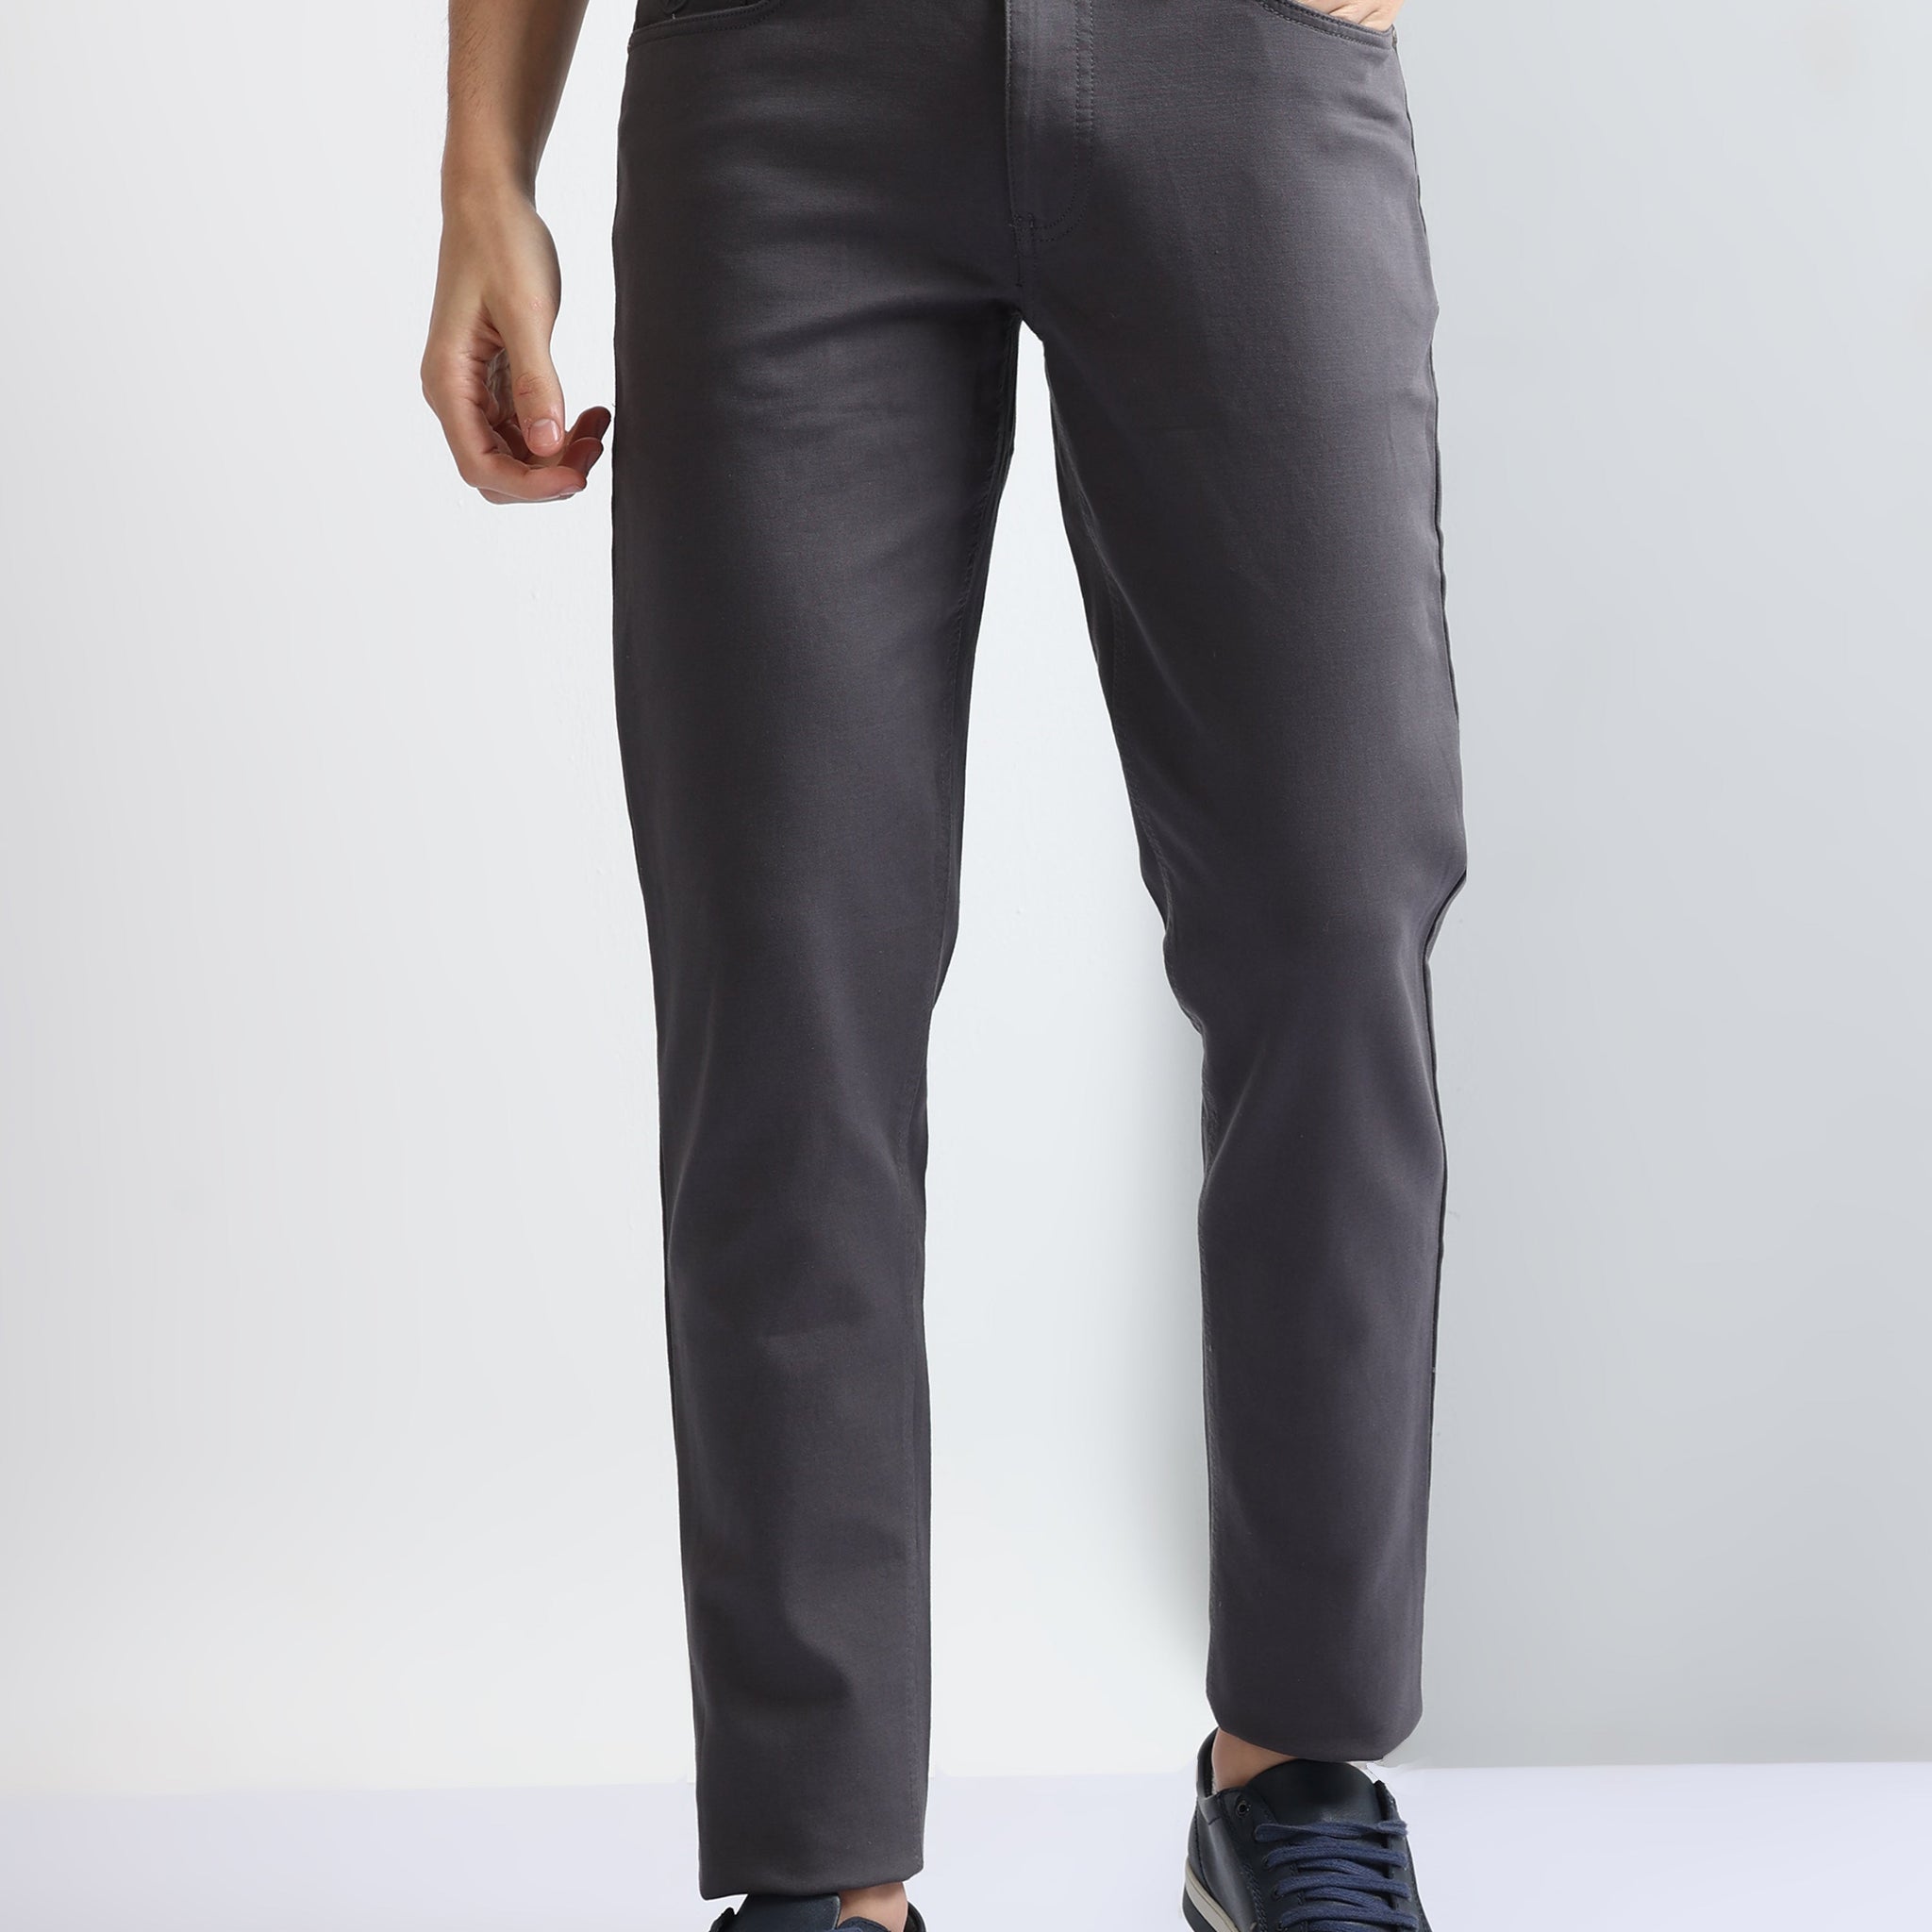 Charcoal Casual Cotton Stretch Men's Trousers